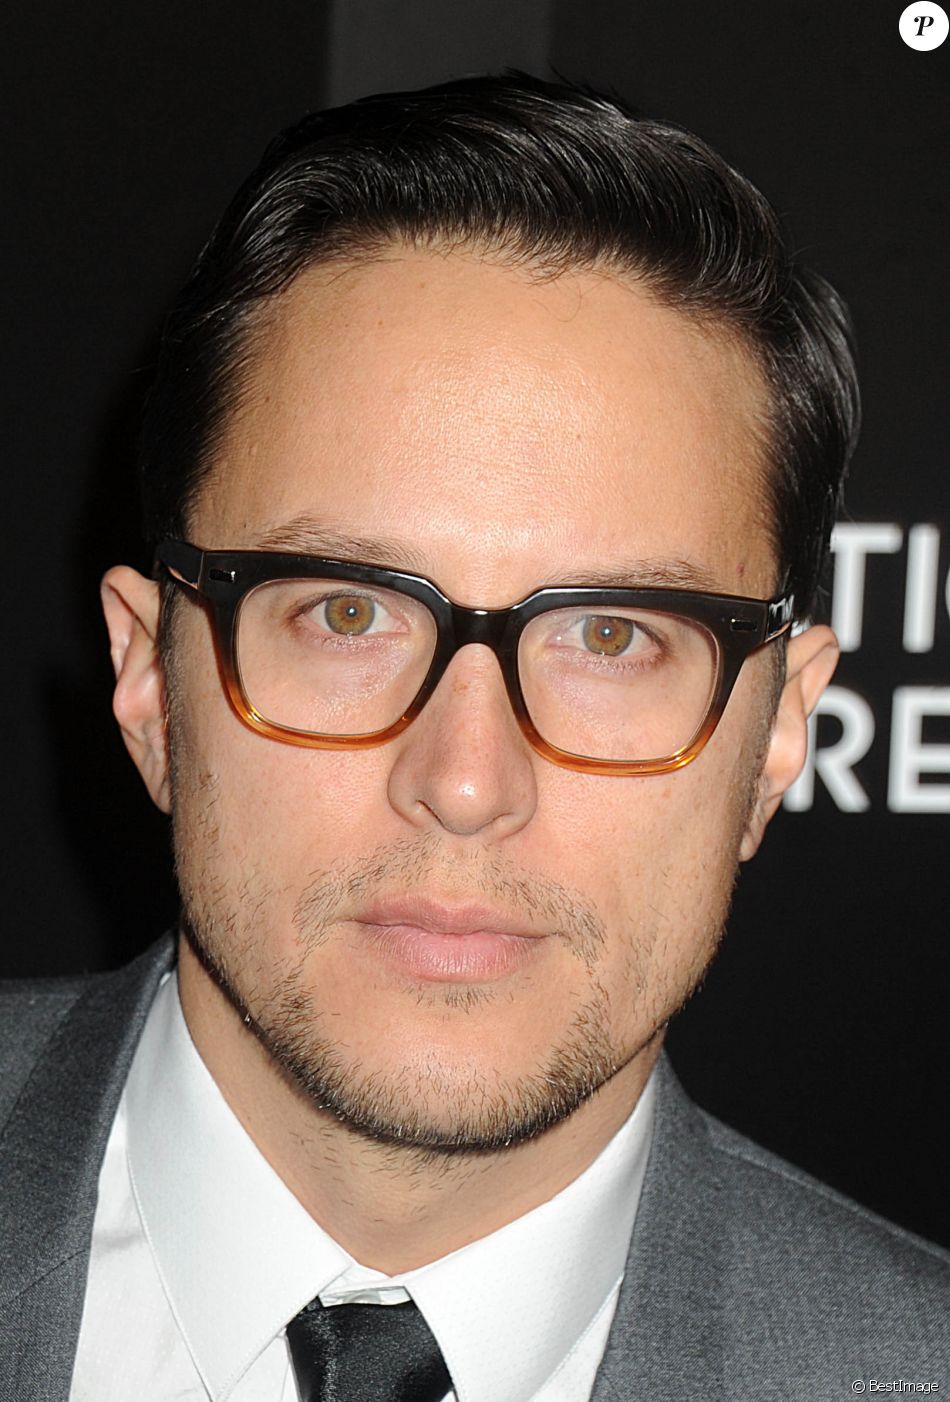 Cary Fukunaga au National Board of review gala 2015 à New York le 5 janvier 2015.